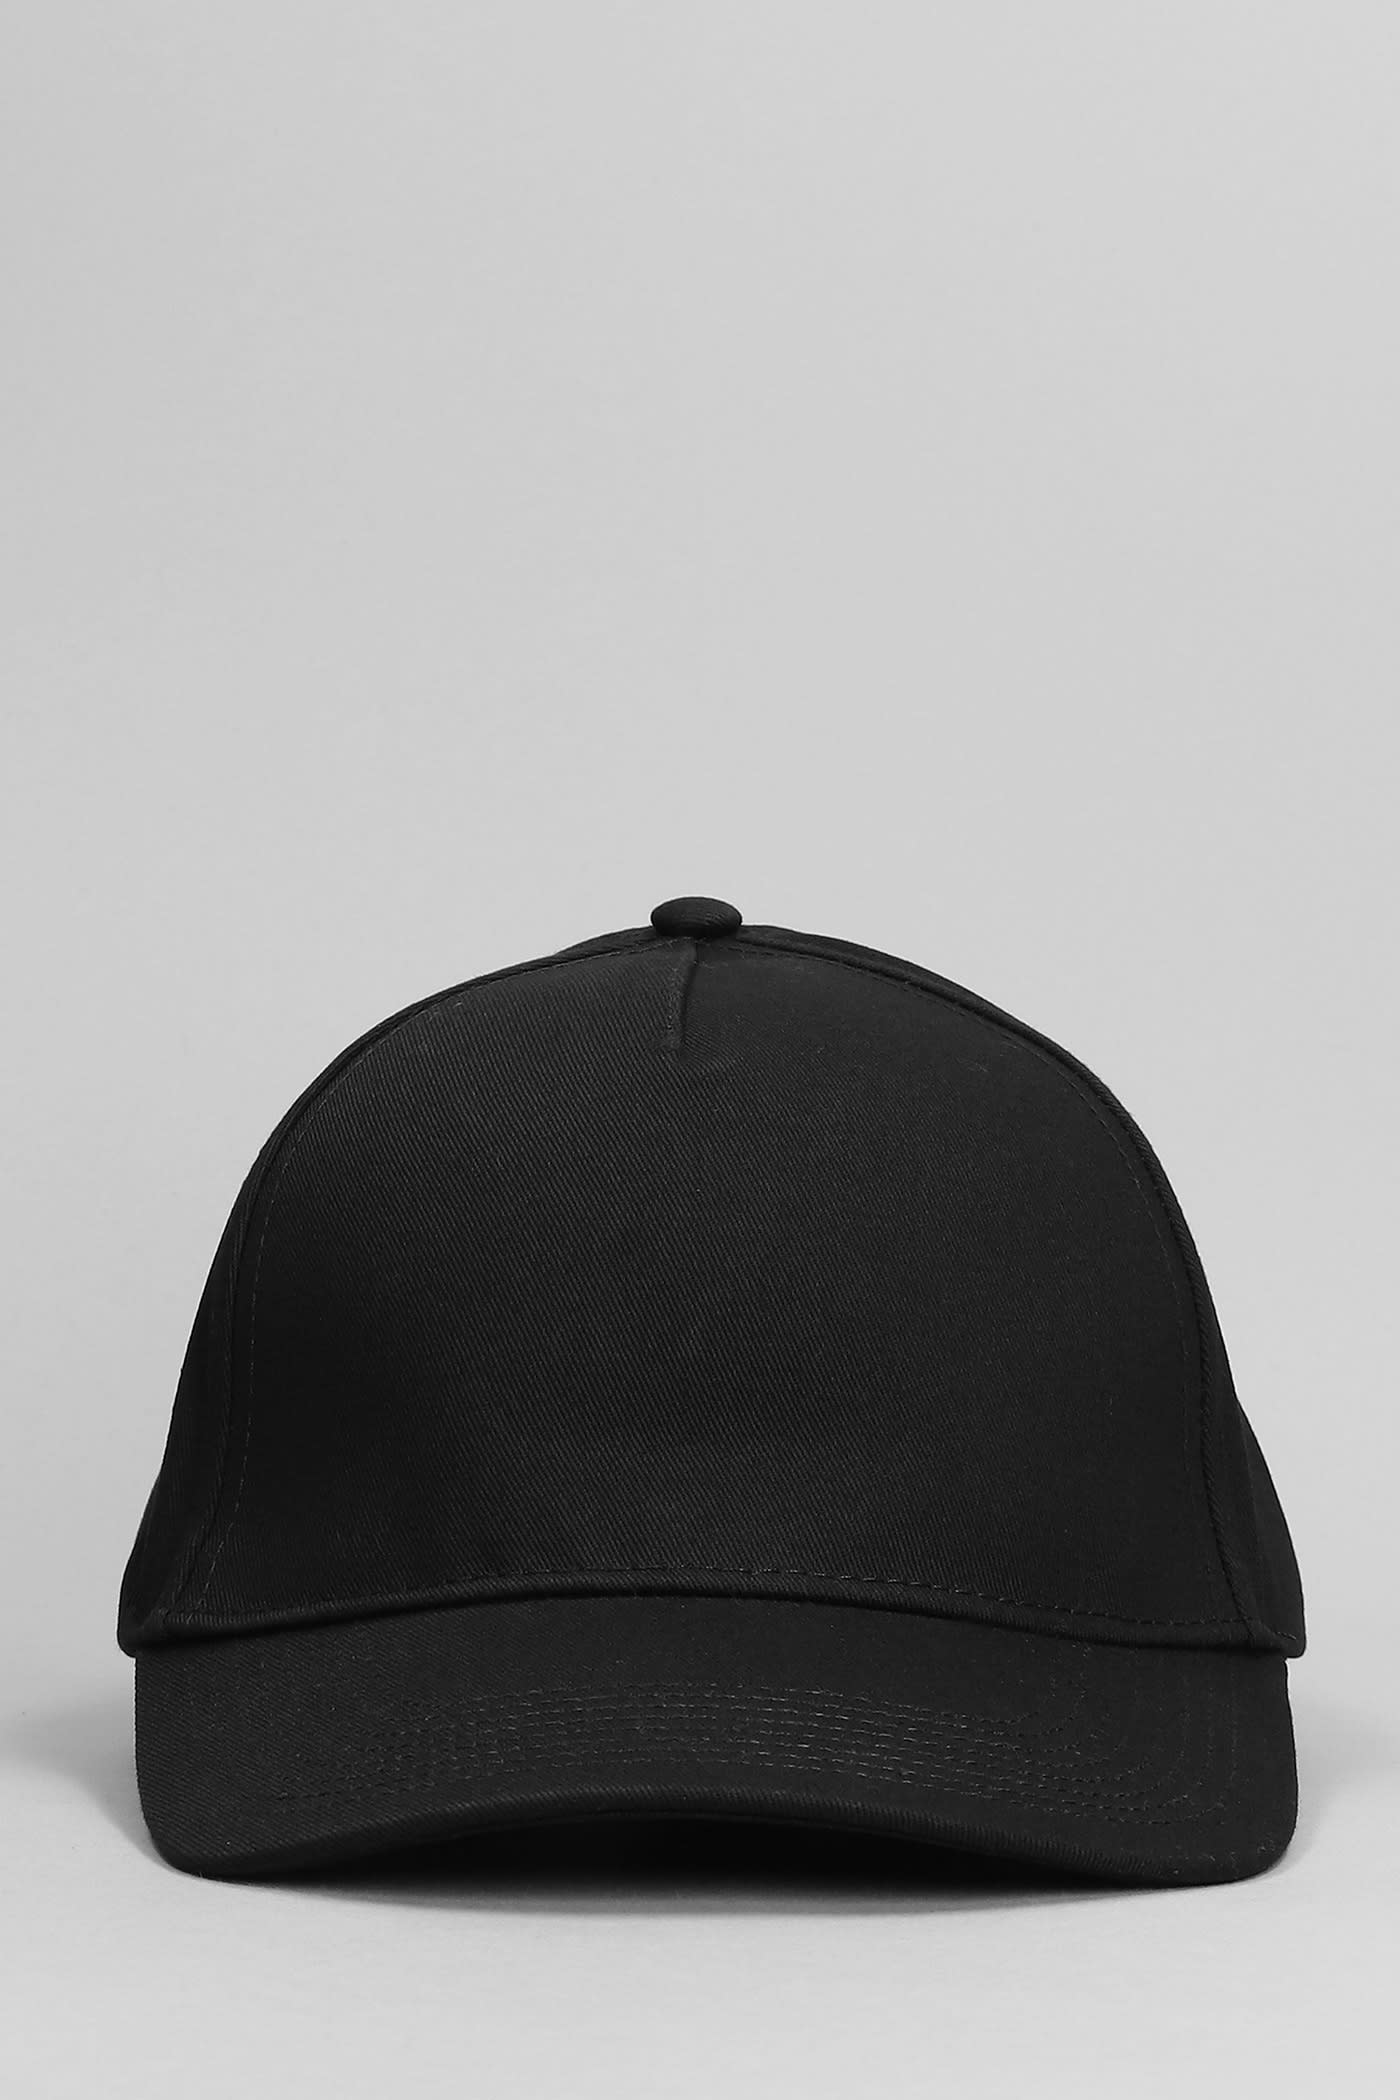 Palm Angels Hats In Black Cotton